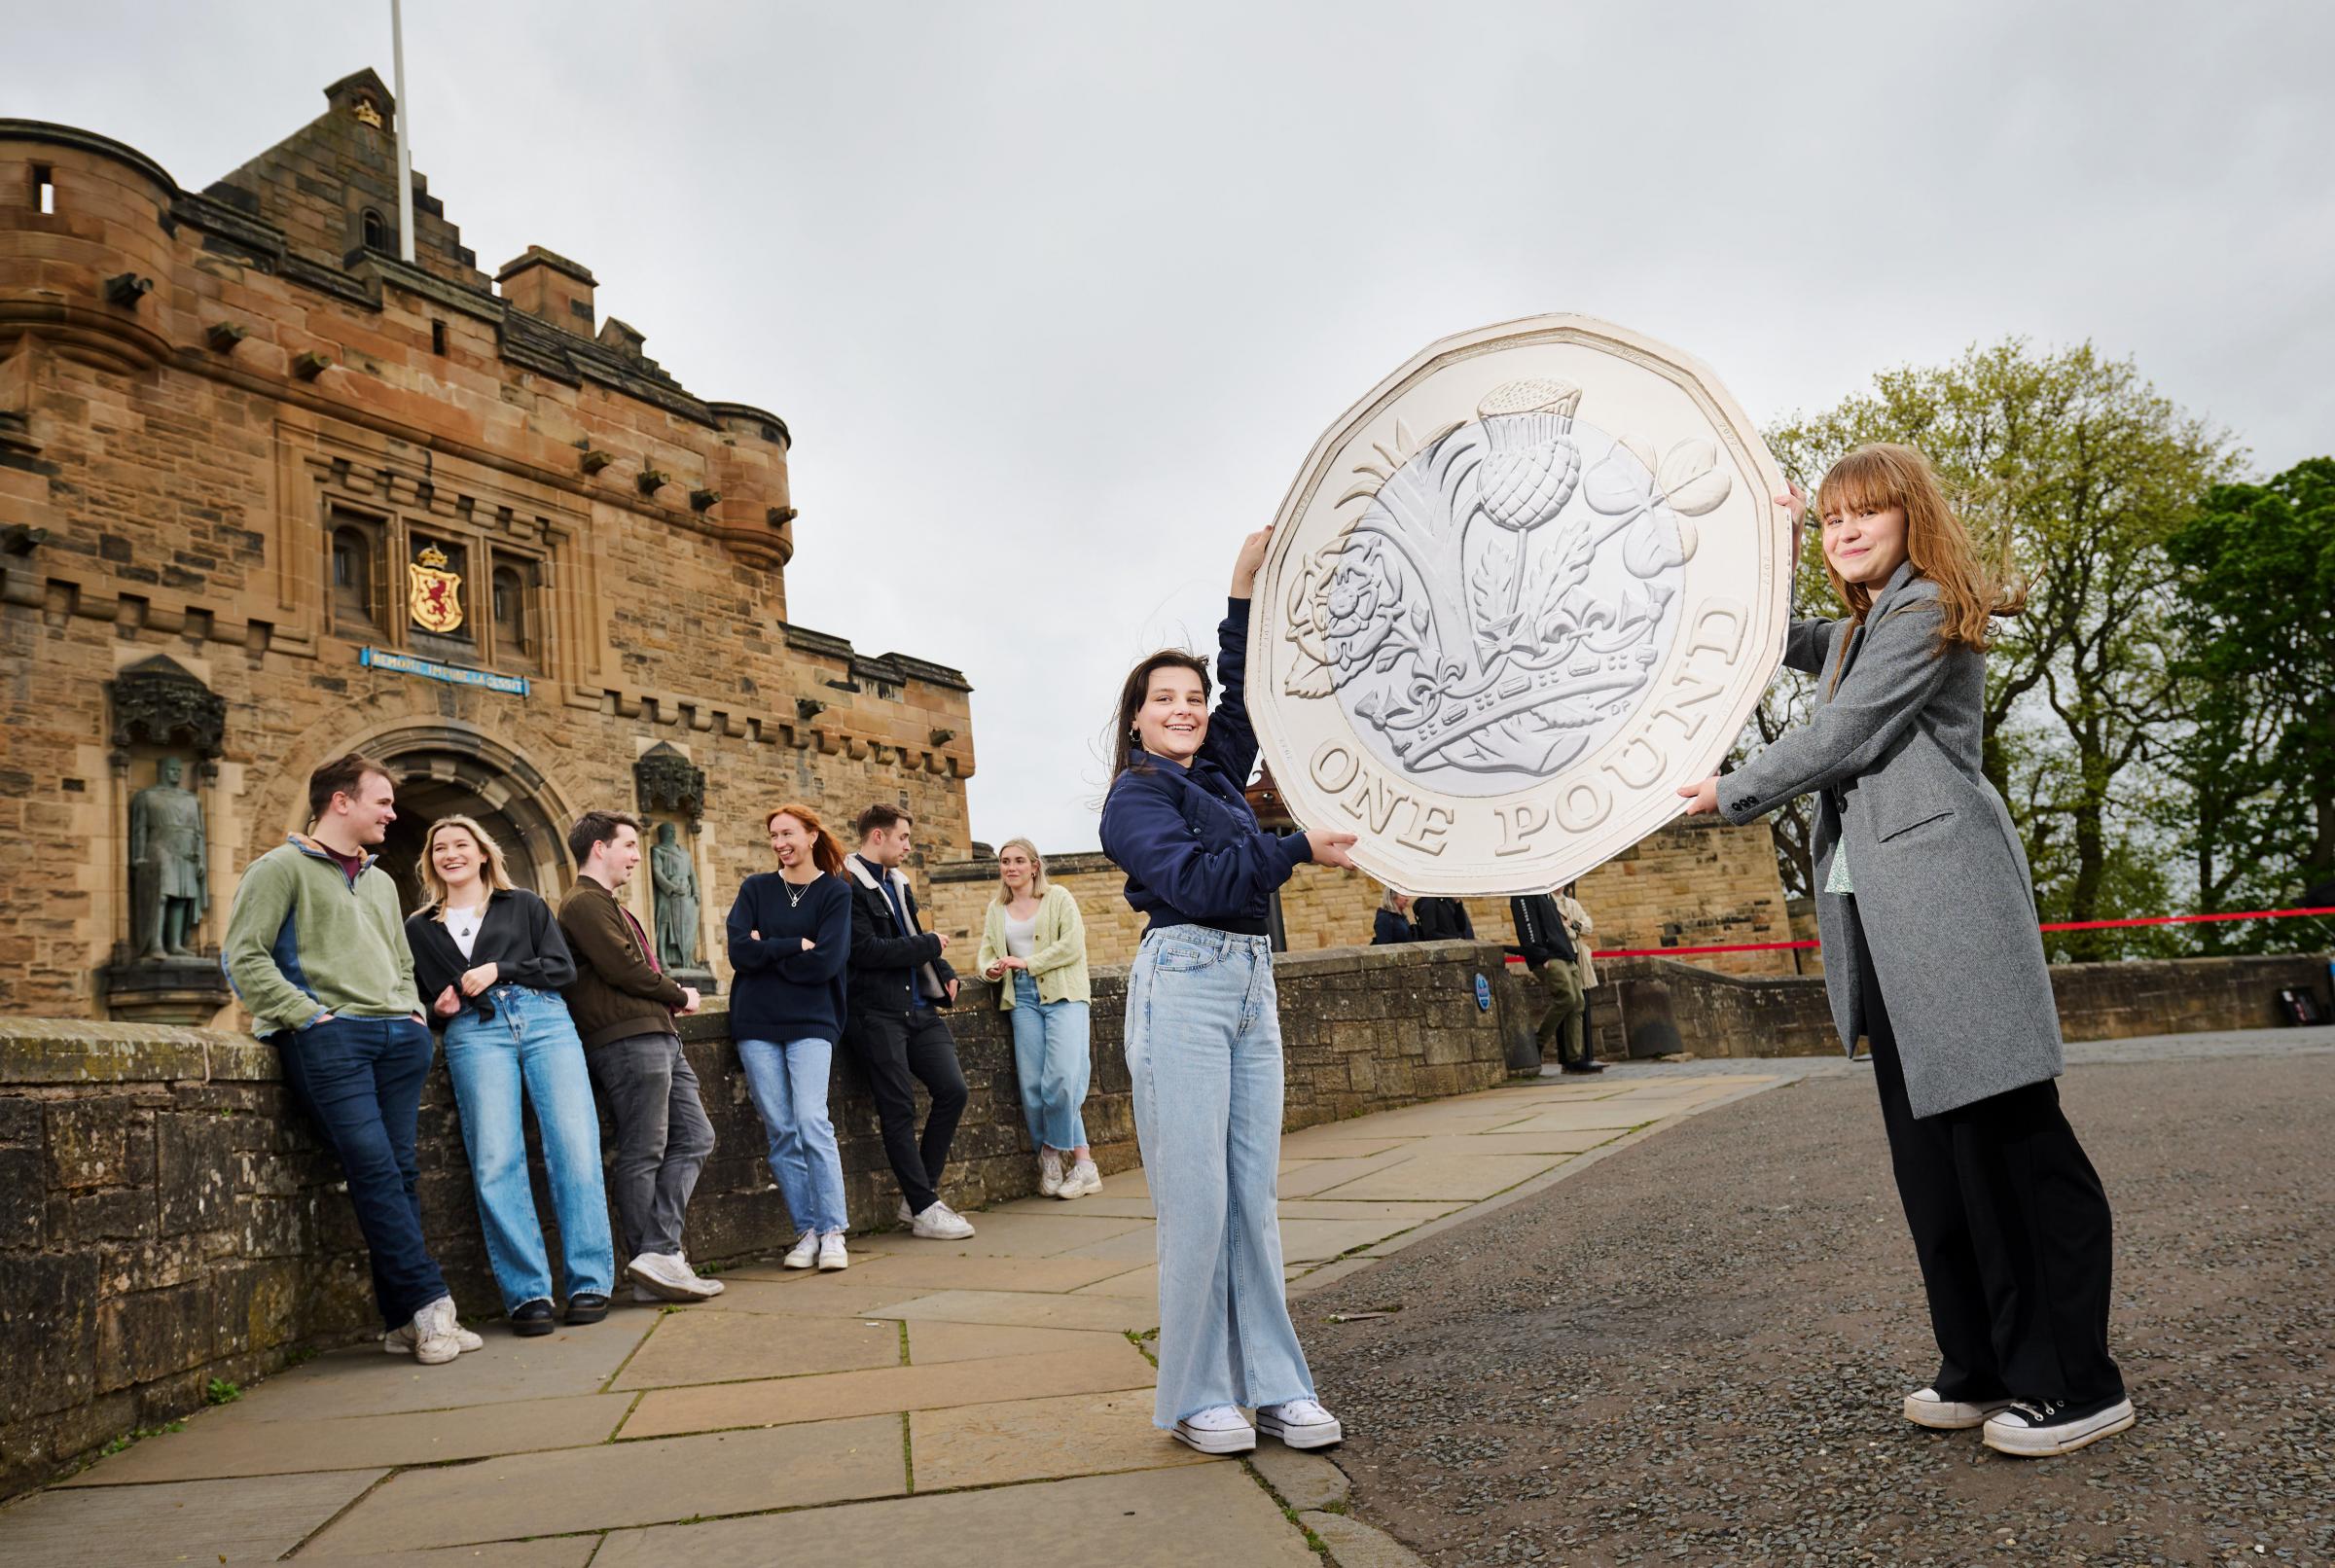 Young Scot cardholders to get access to Pollok House, and Glasgow Cathedral for just £1